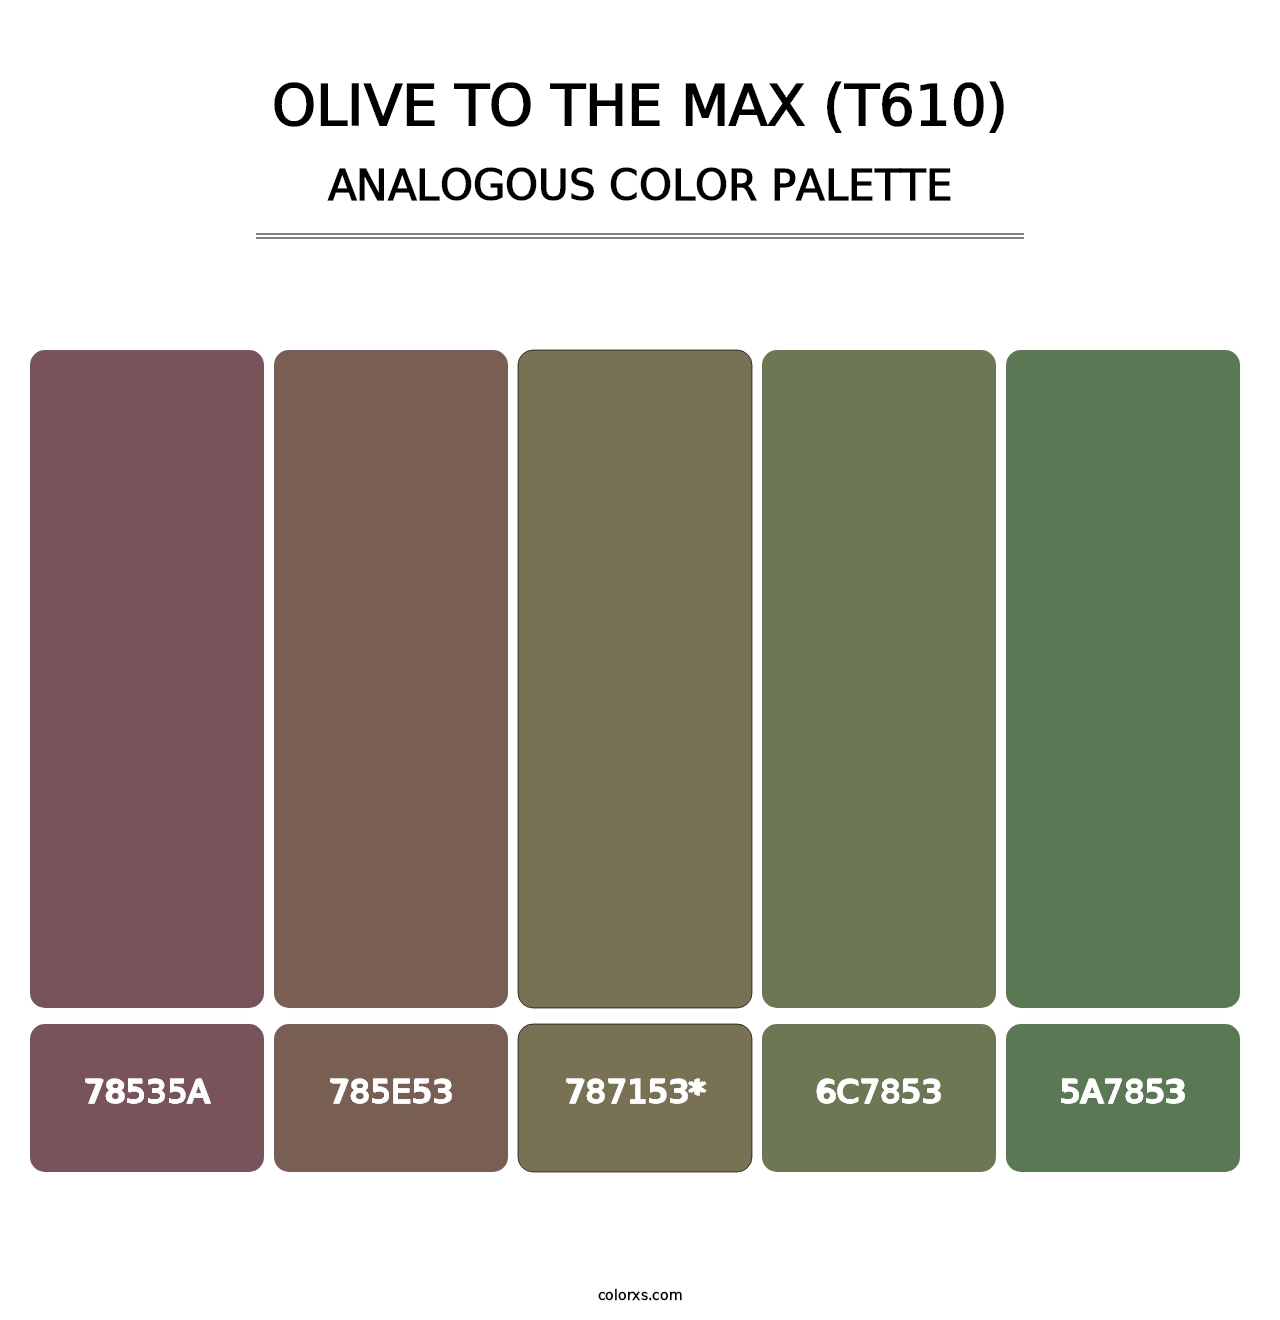 Olive to the Max (T610) - Analogous Color Palette